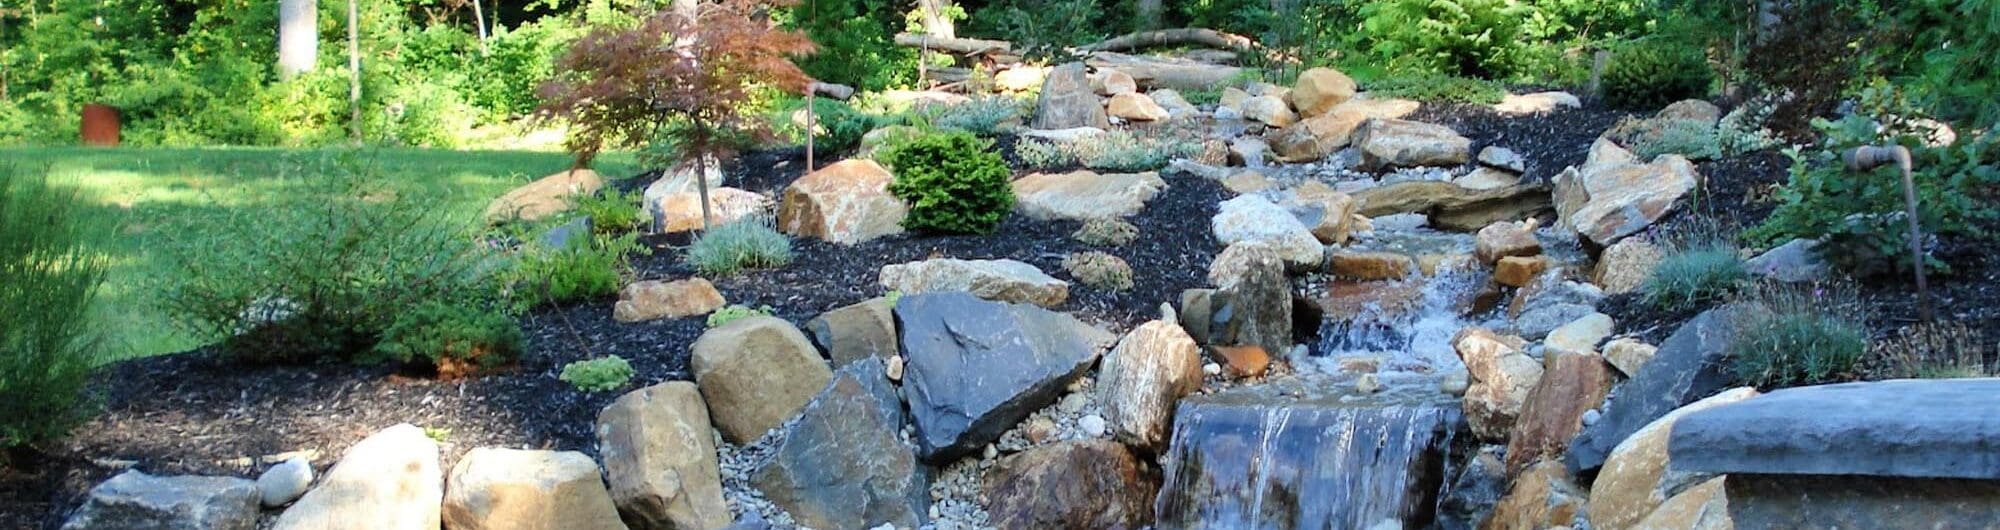 West Chester PA Hardscaping